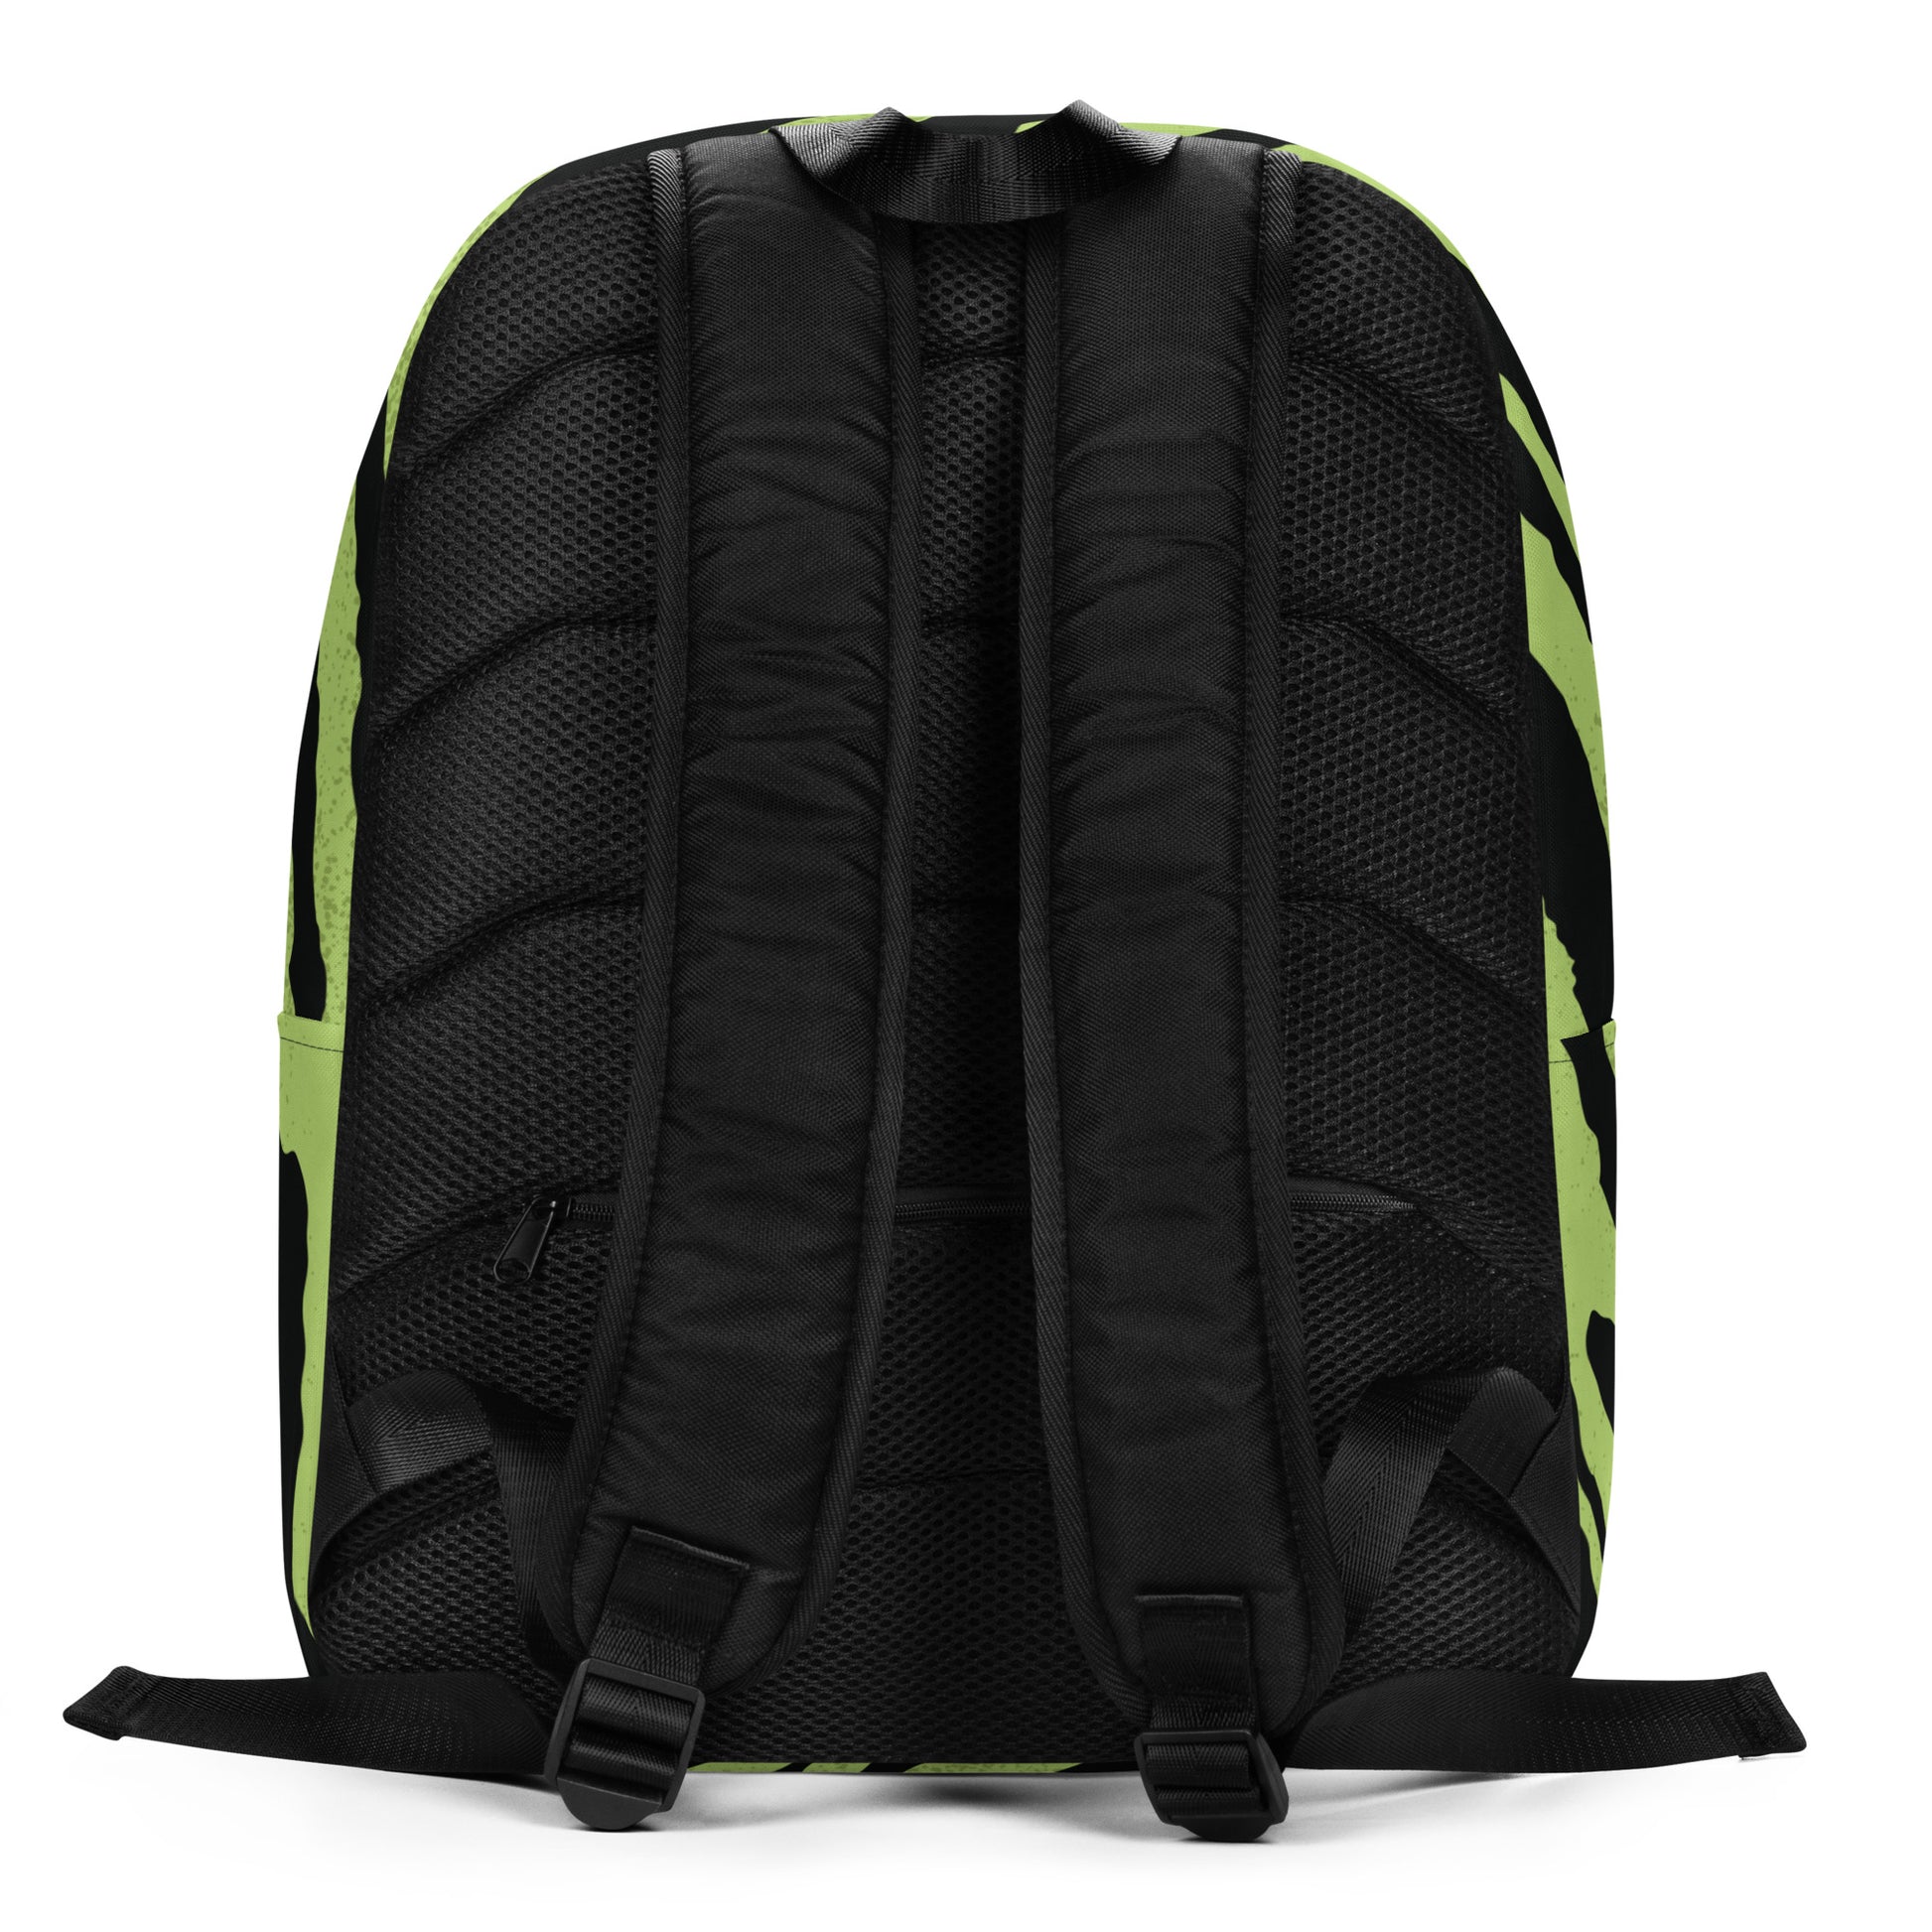 Tropical pop art minimalist backpack seen from the back